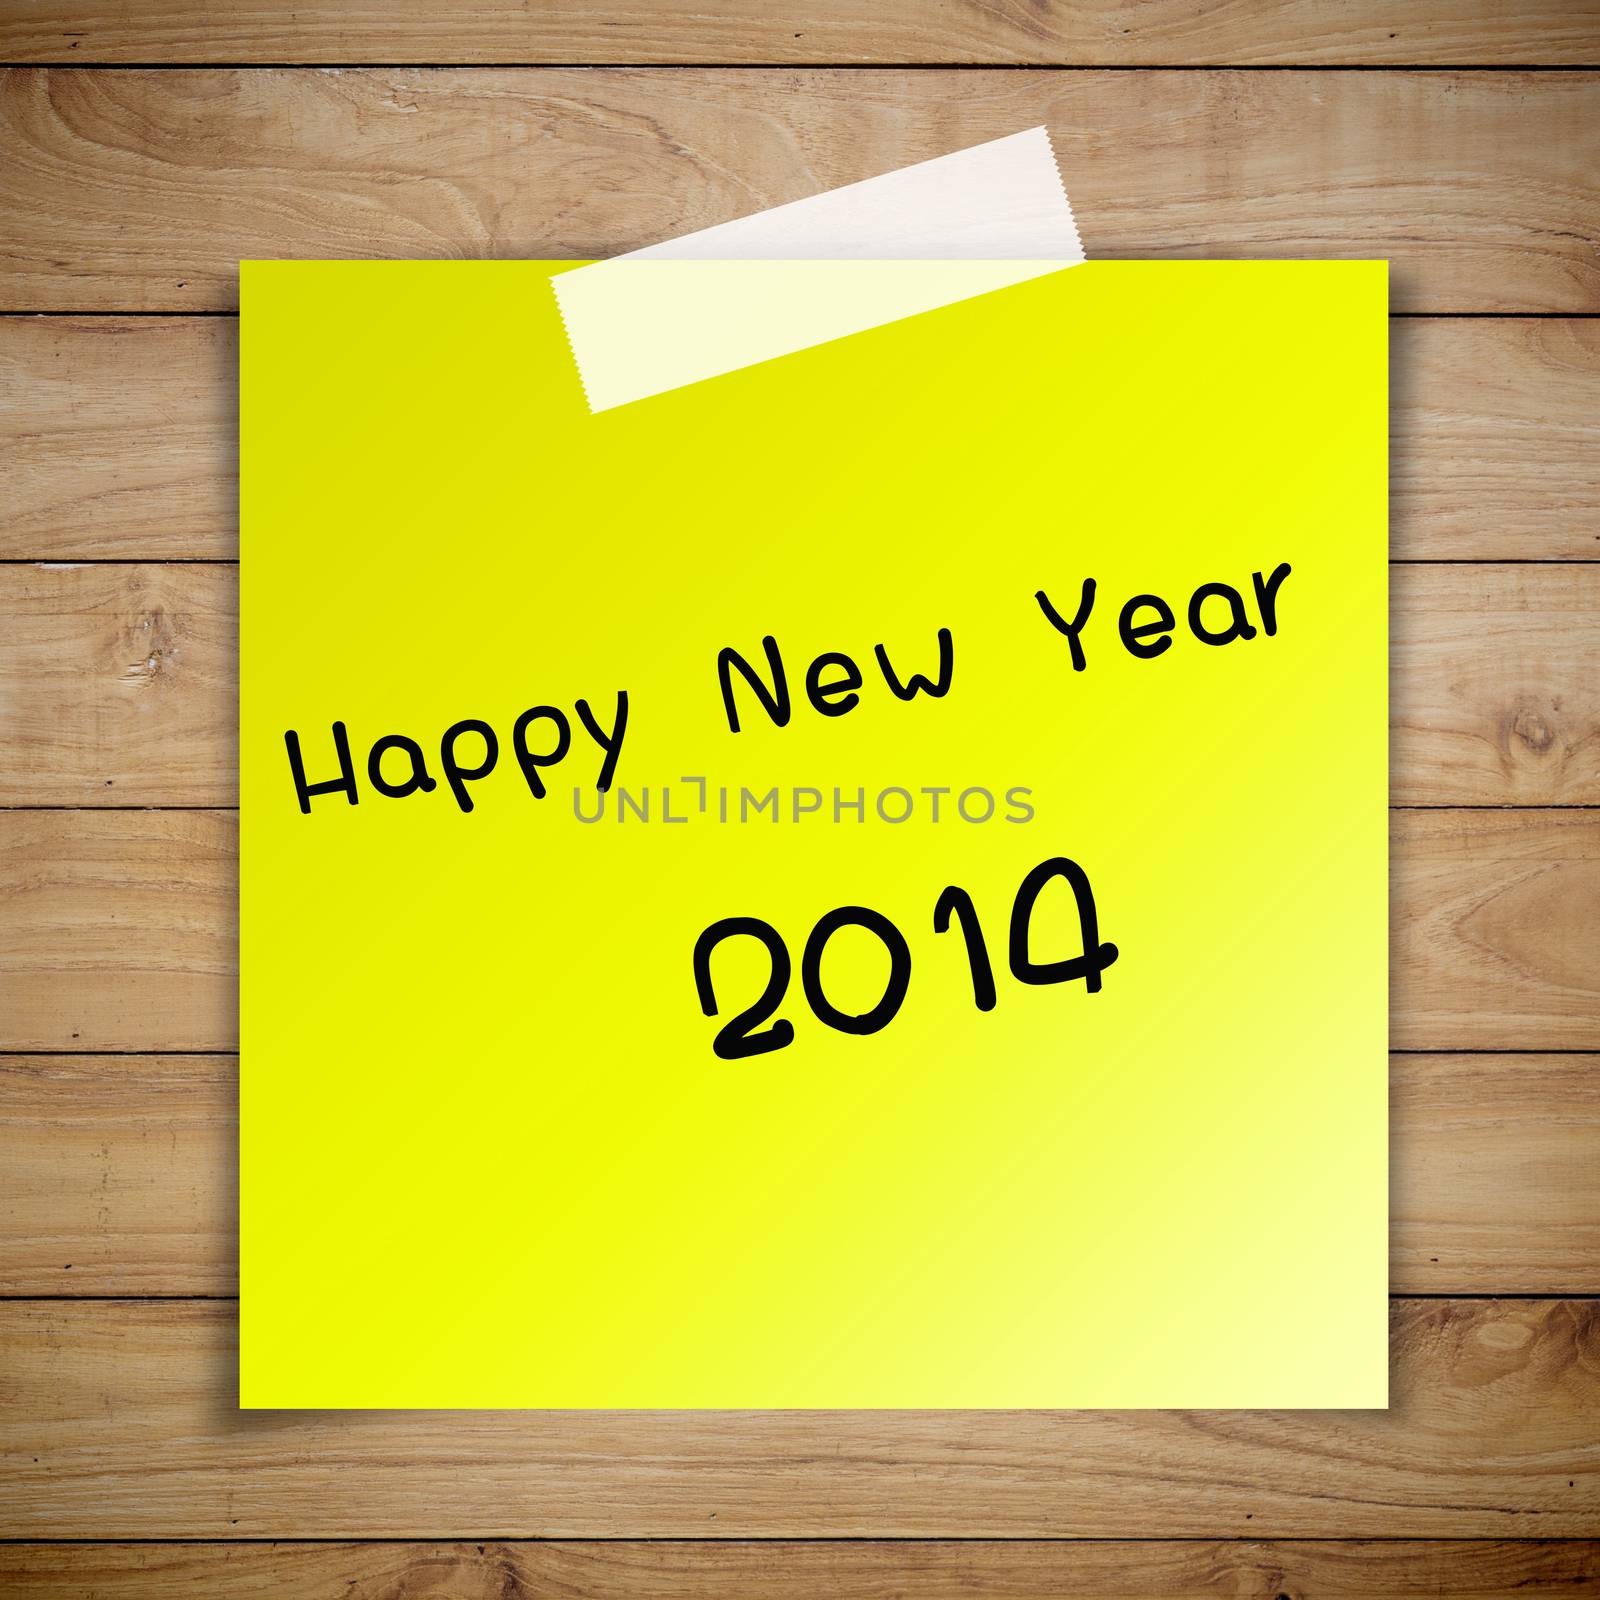 Happy New Year 2014 on sticky paper on Brown wood plank wall tex by 2nix